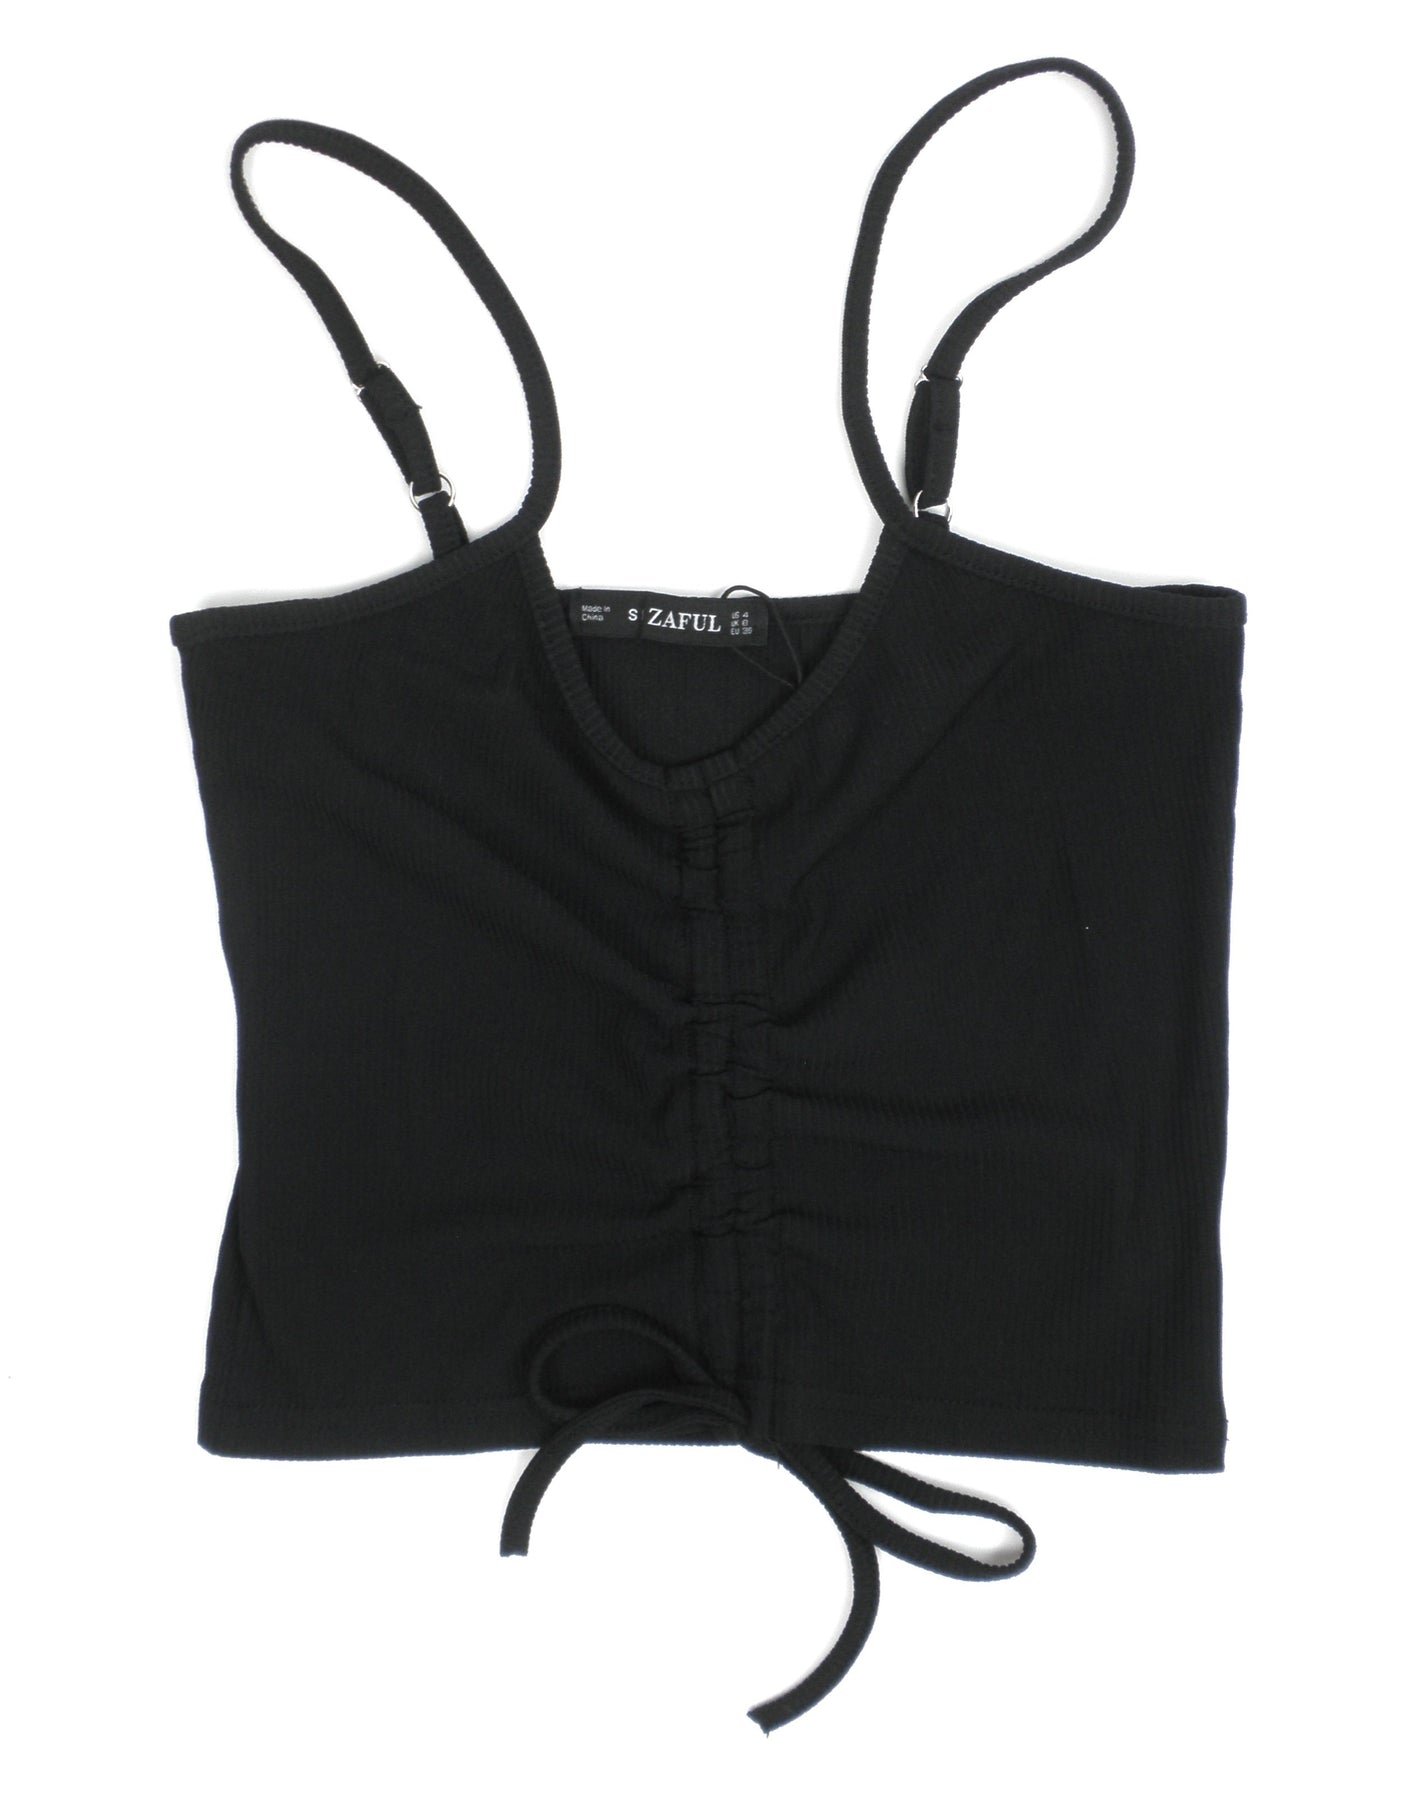 Zaful Black Ruched Tank Top - Small – The Fashion Foundation